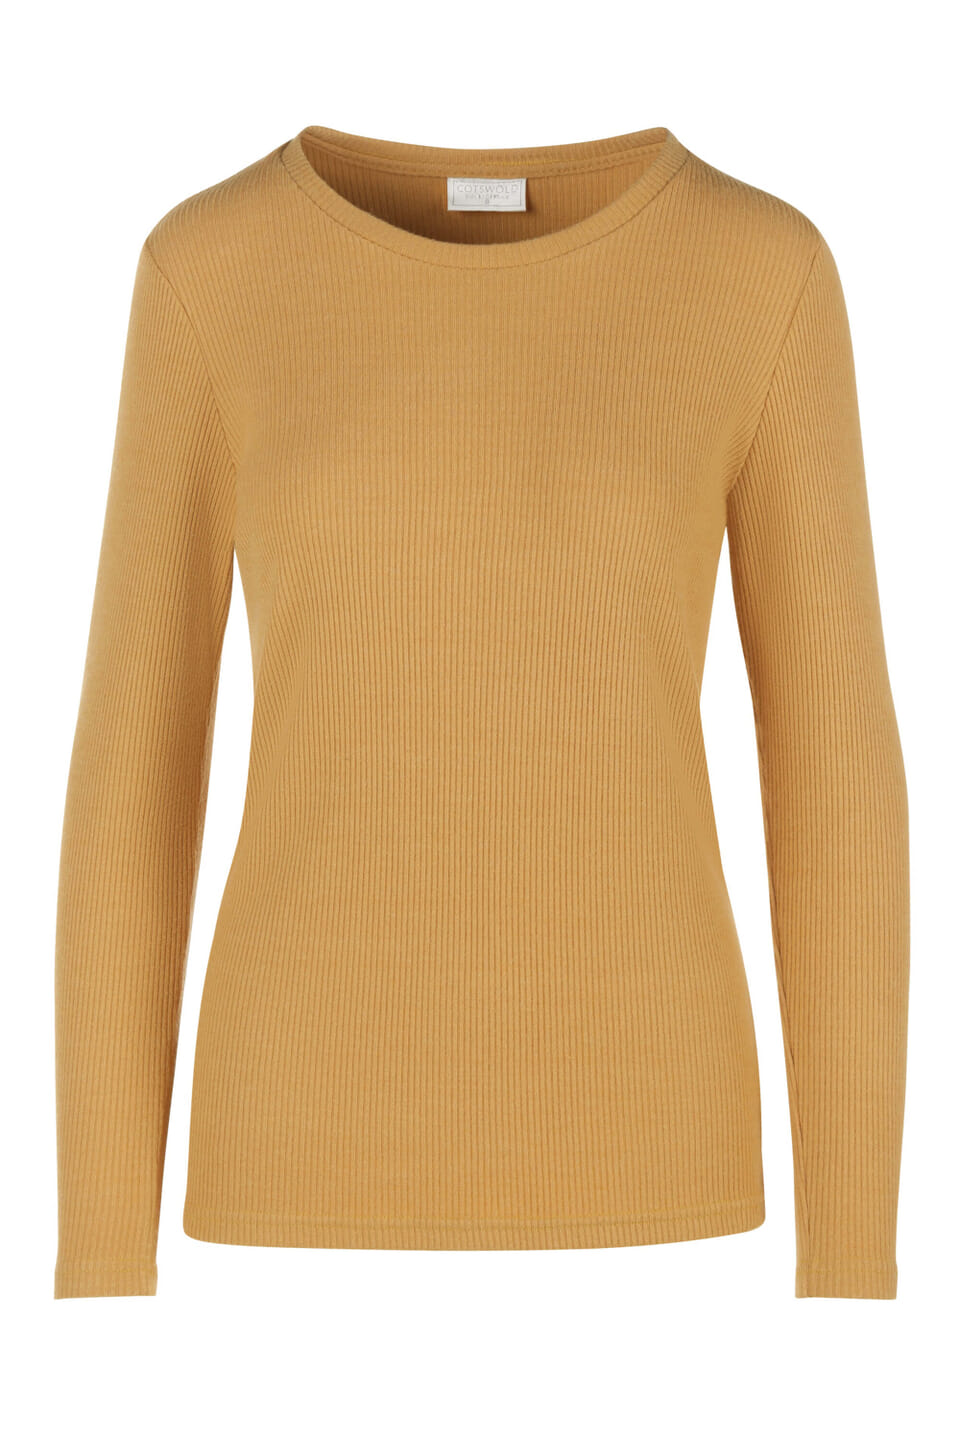 Women's Classic Tops | Cotswold Collections